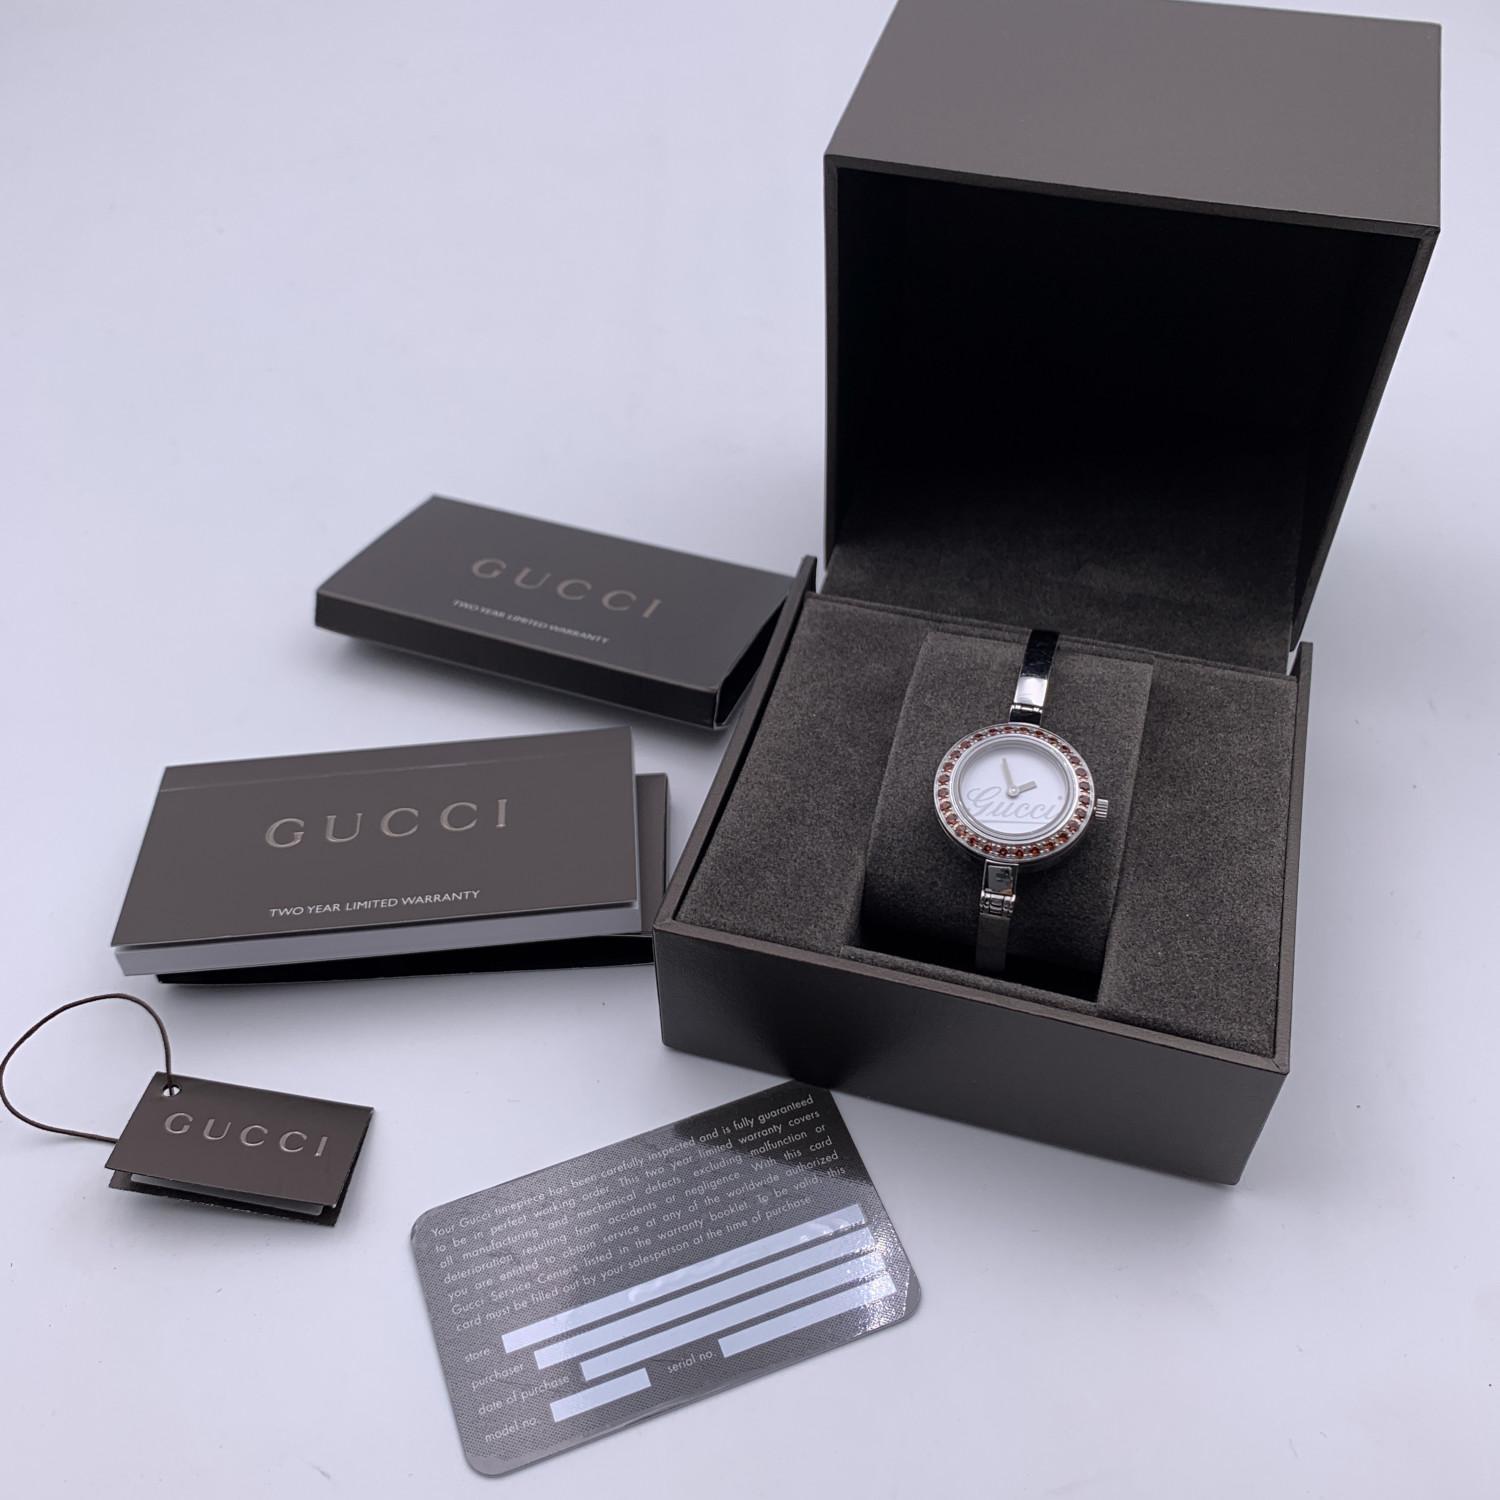 Gucci Bezel Watch - 3 For Sale on 1stDibs | gucci interchangeable bezel  watch, gucci bezel watch original price, gucci bezel watch price